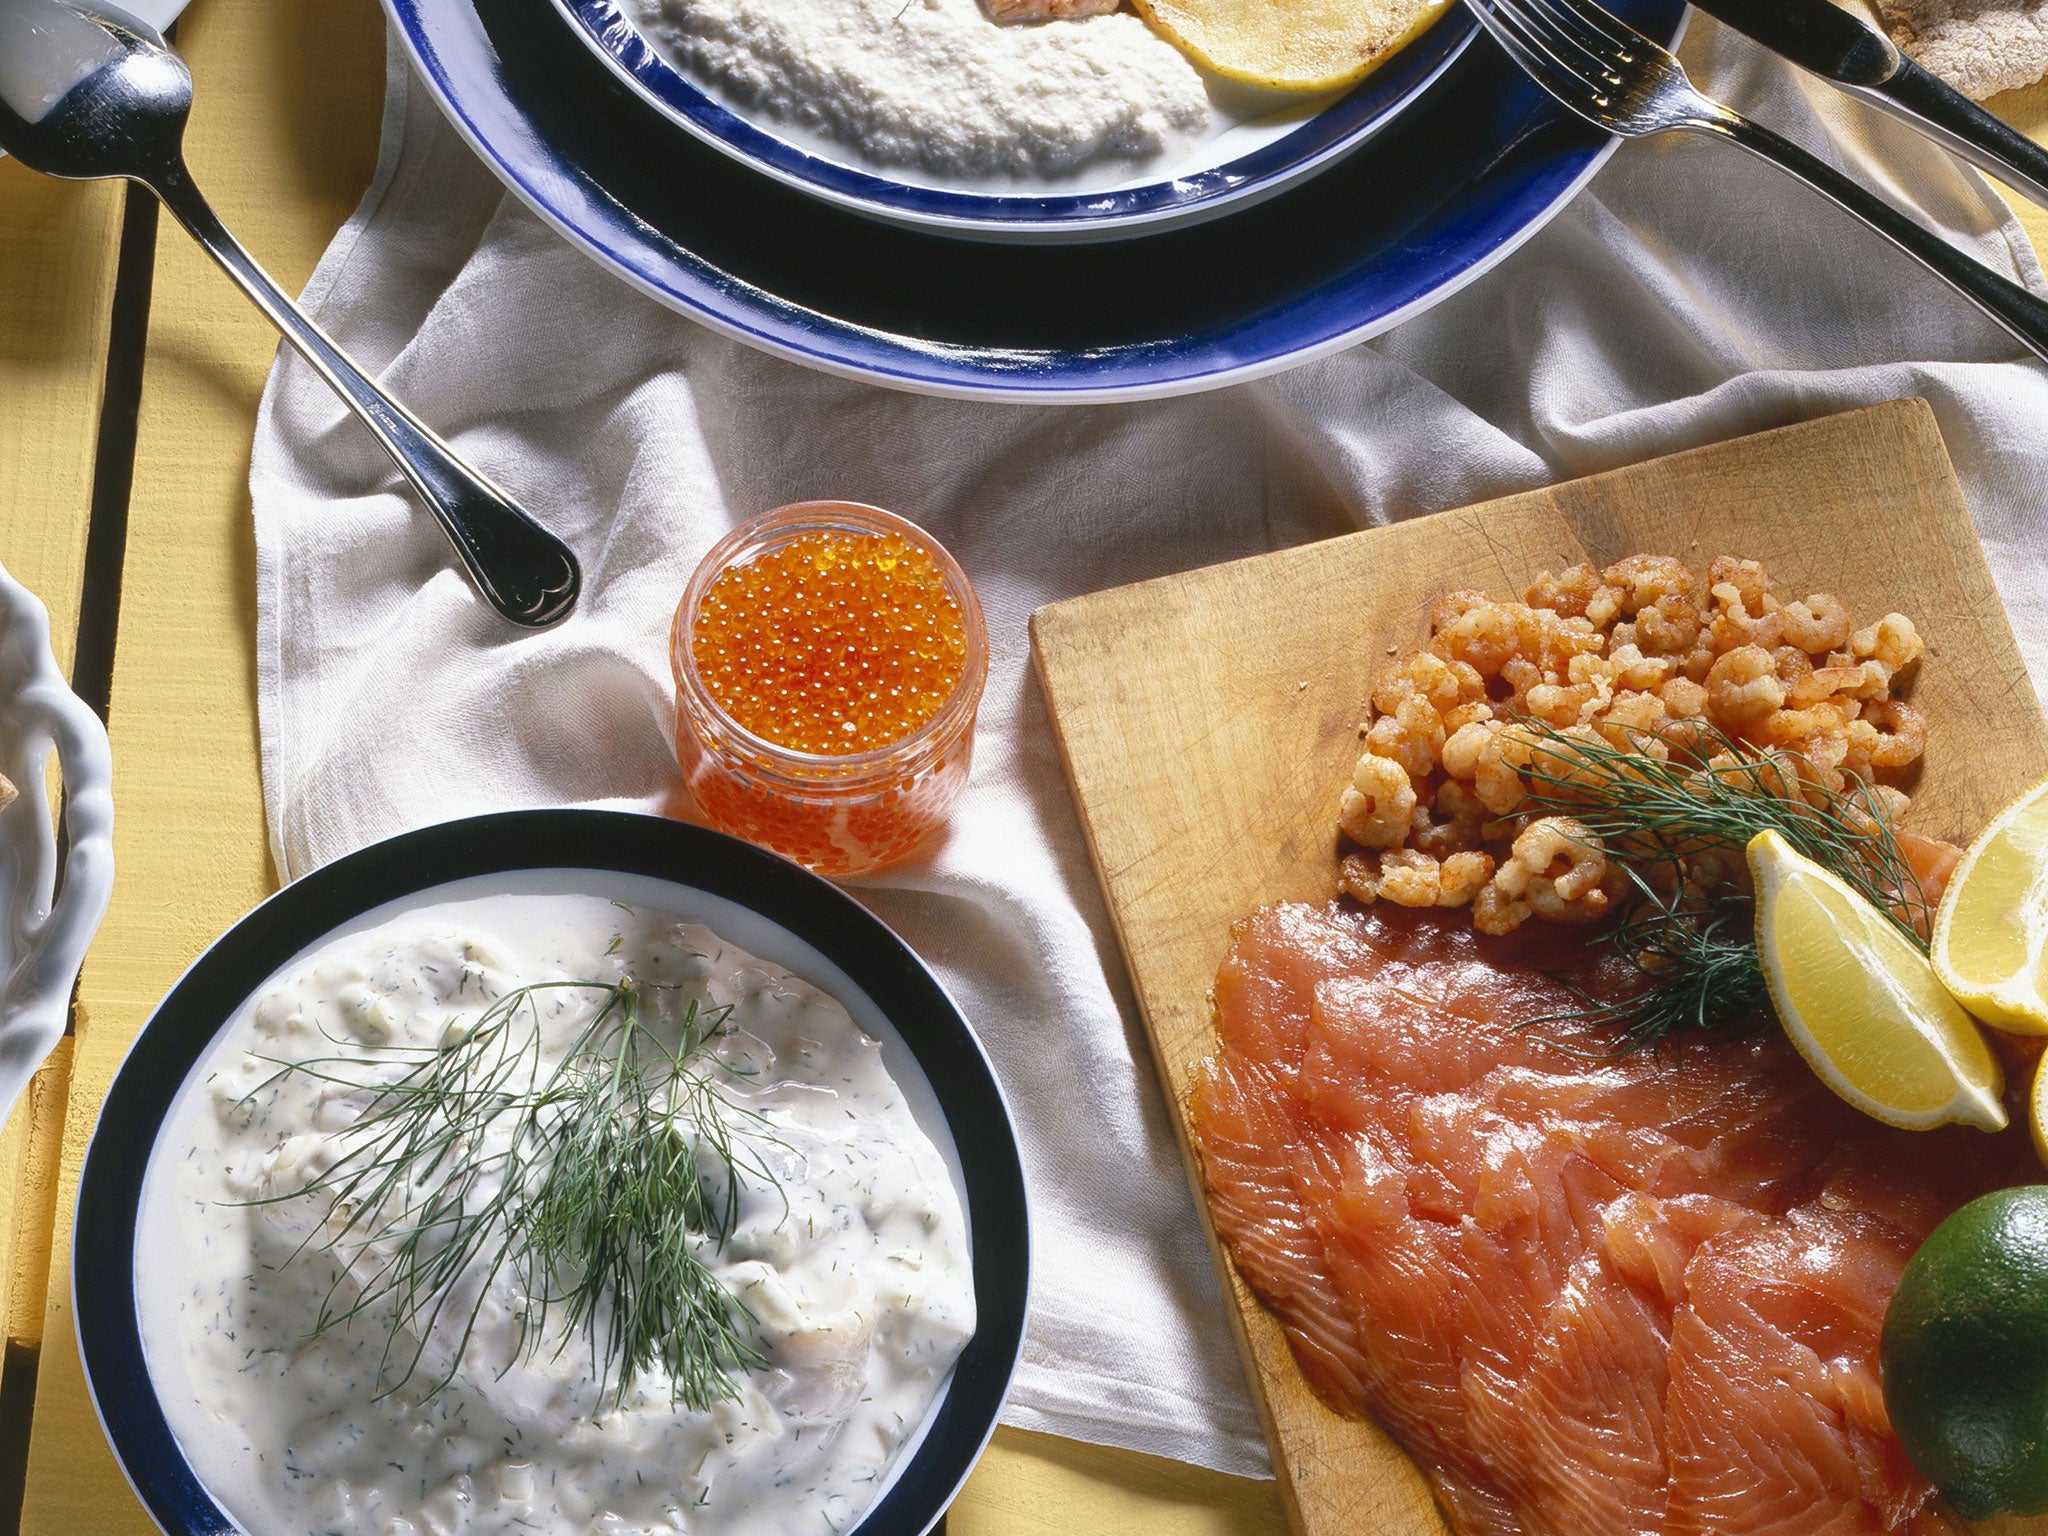 A selection of traditional Swedish dishes, incuding fish